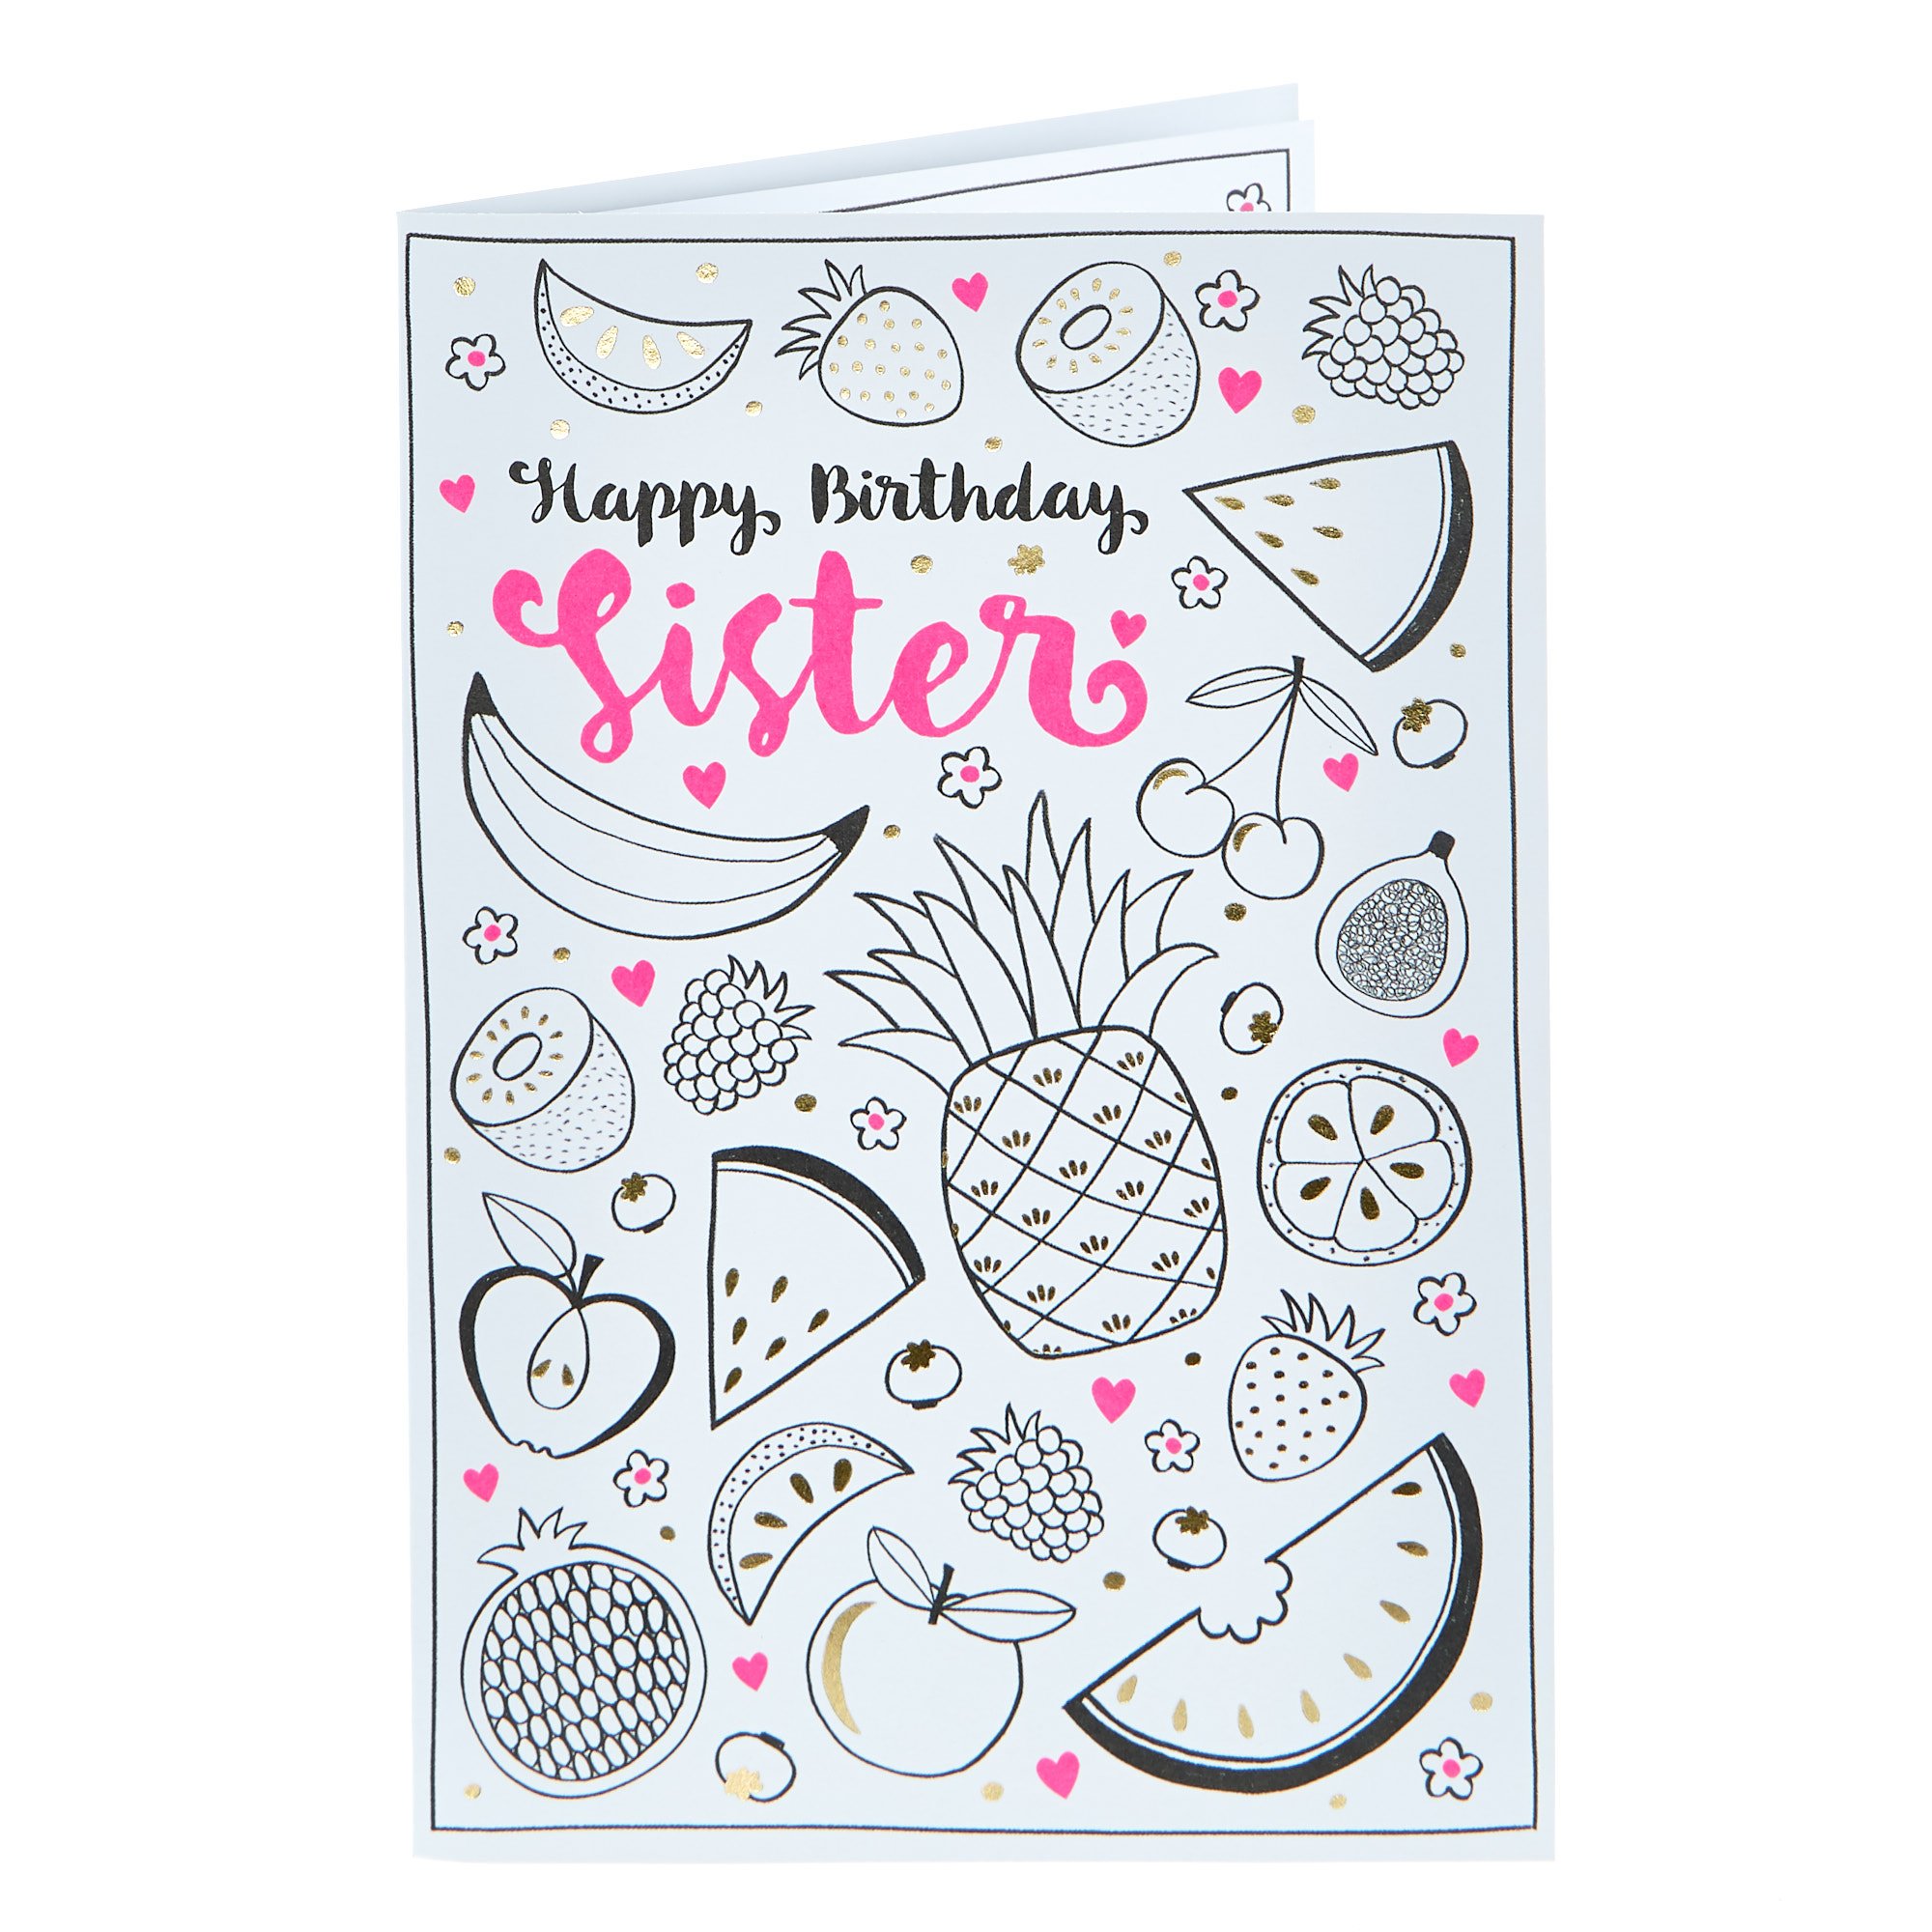 Colour-In Birthday Card - Sister (With Stickers)